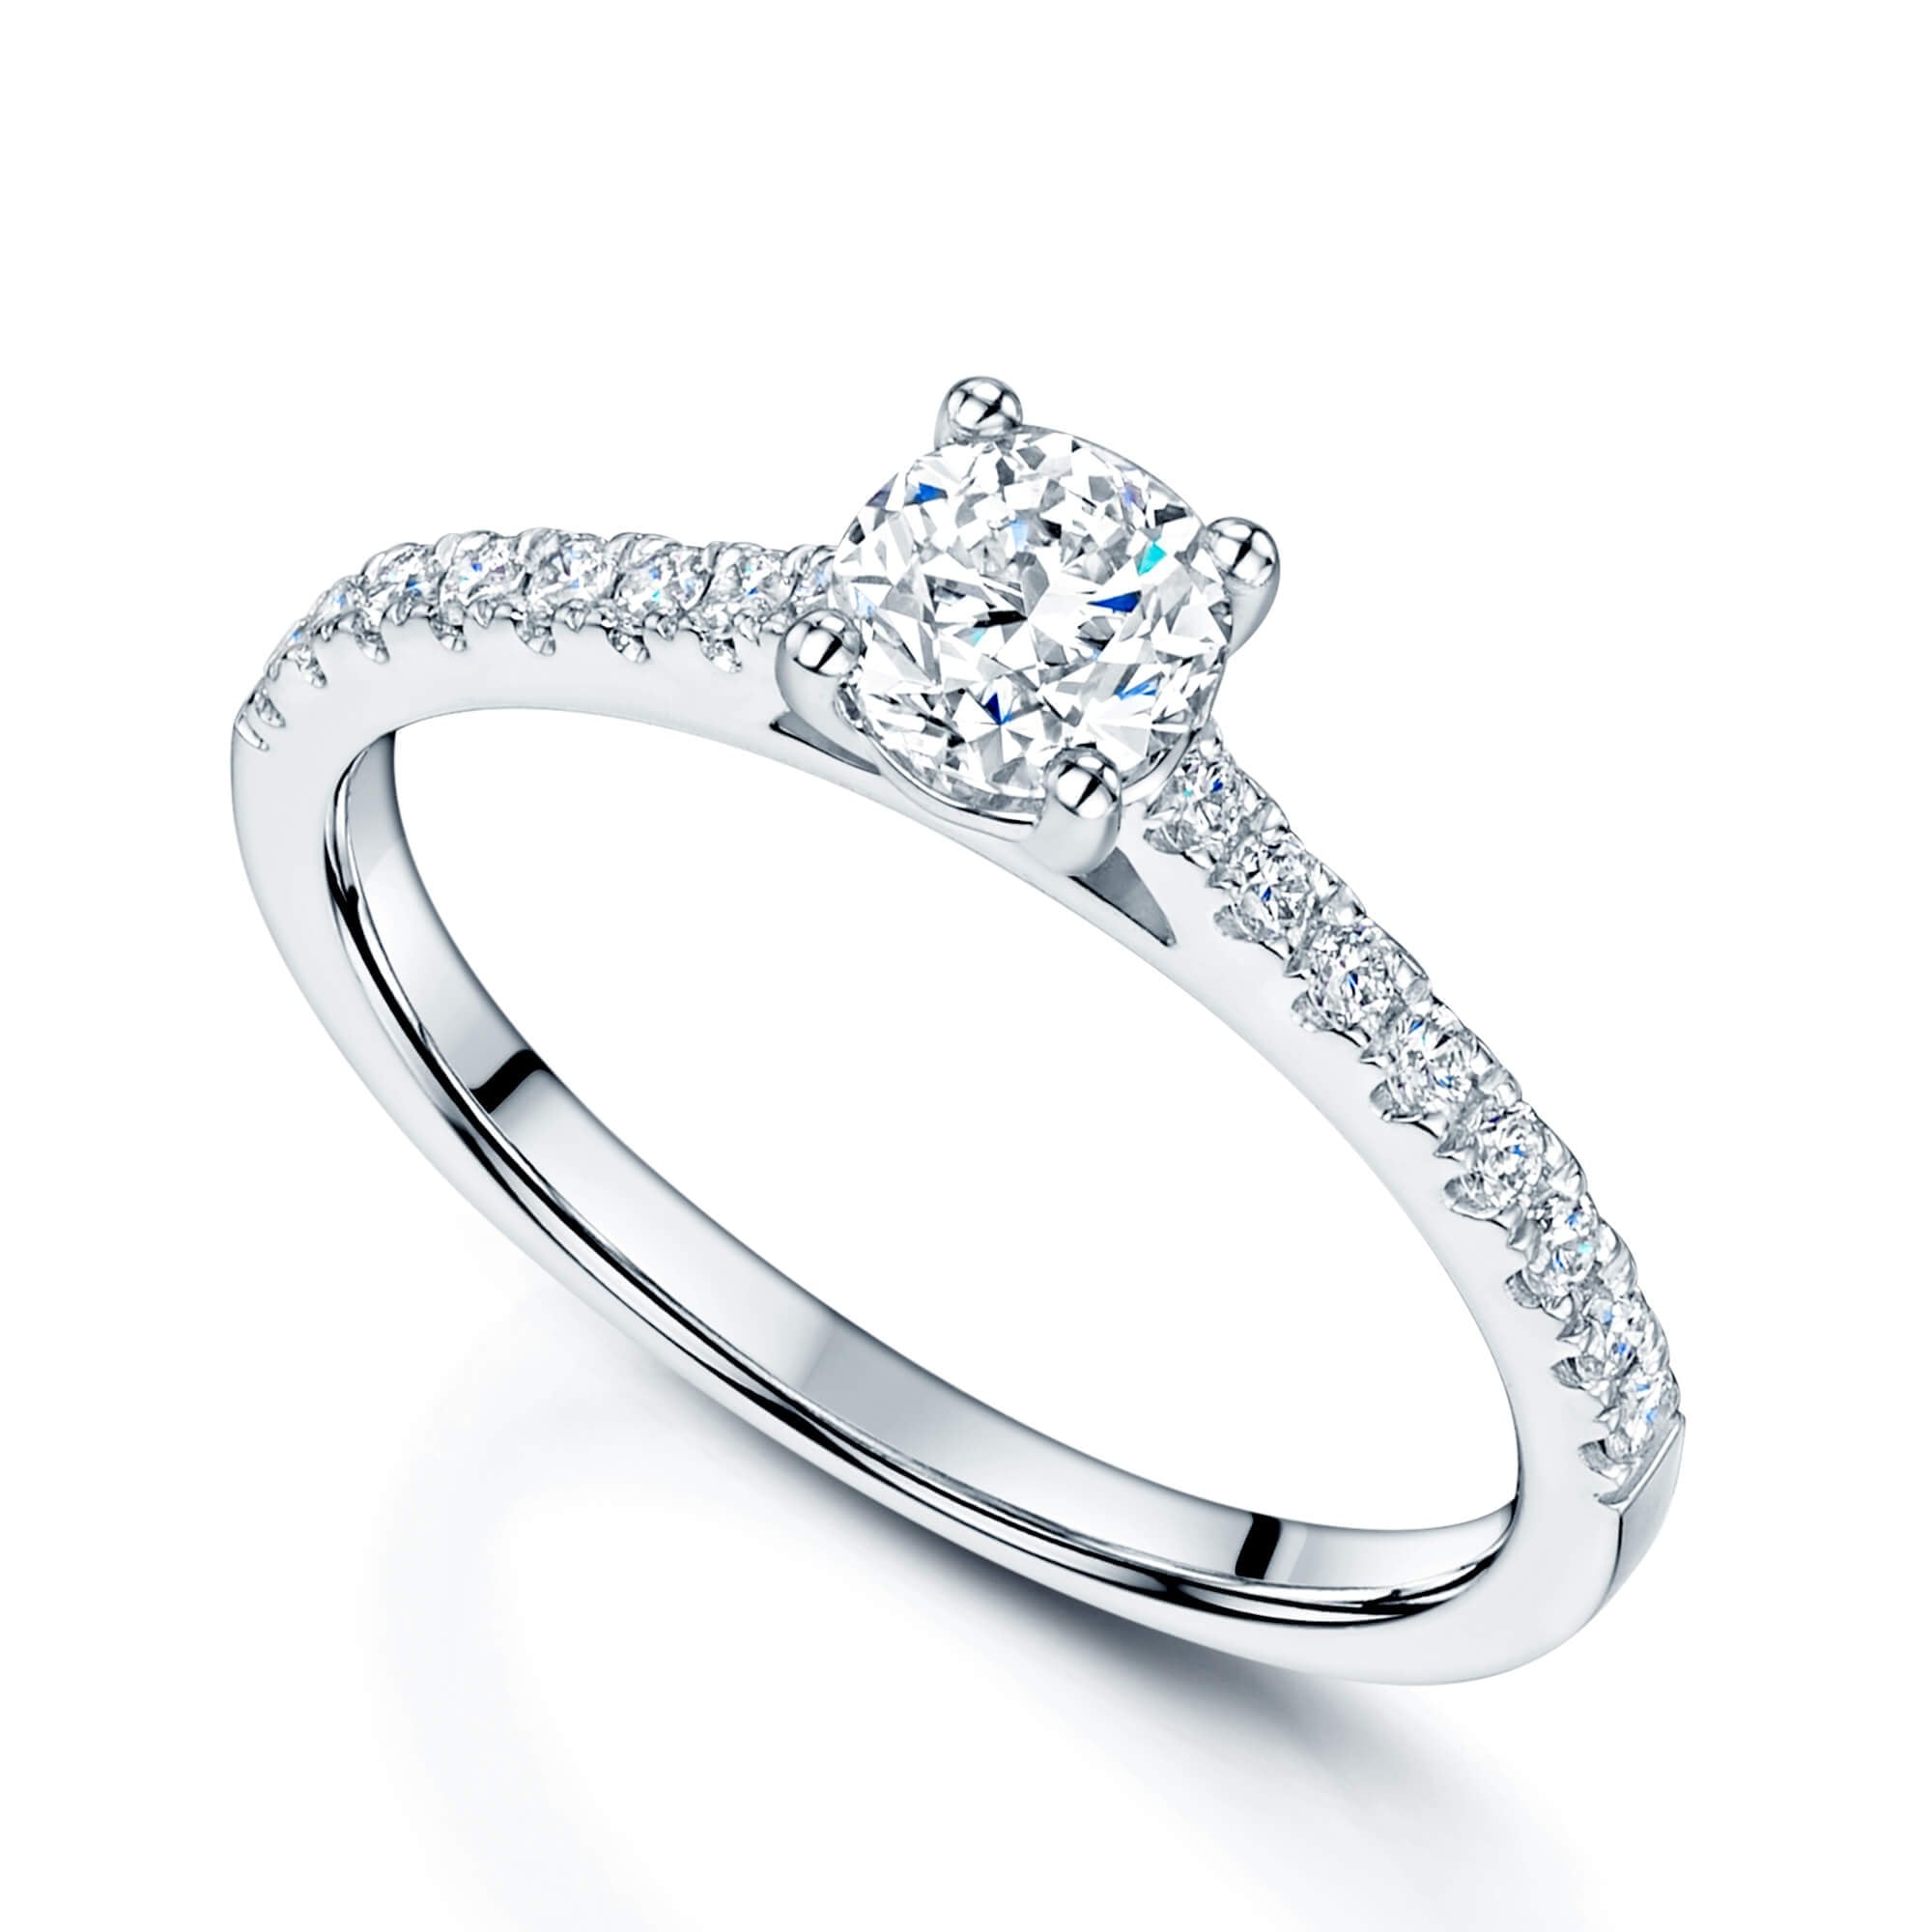 Simply Solitaire Collection Platinum Set Diamond Solitaire Engagement Ring With Diamond Shoulders GIA Certified 0.50 Carat